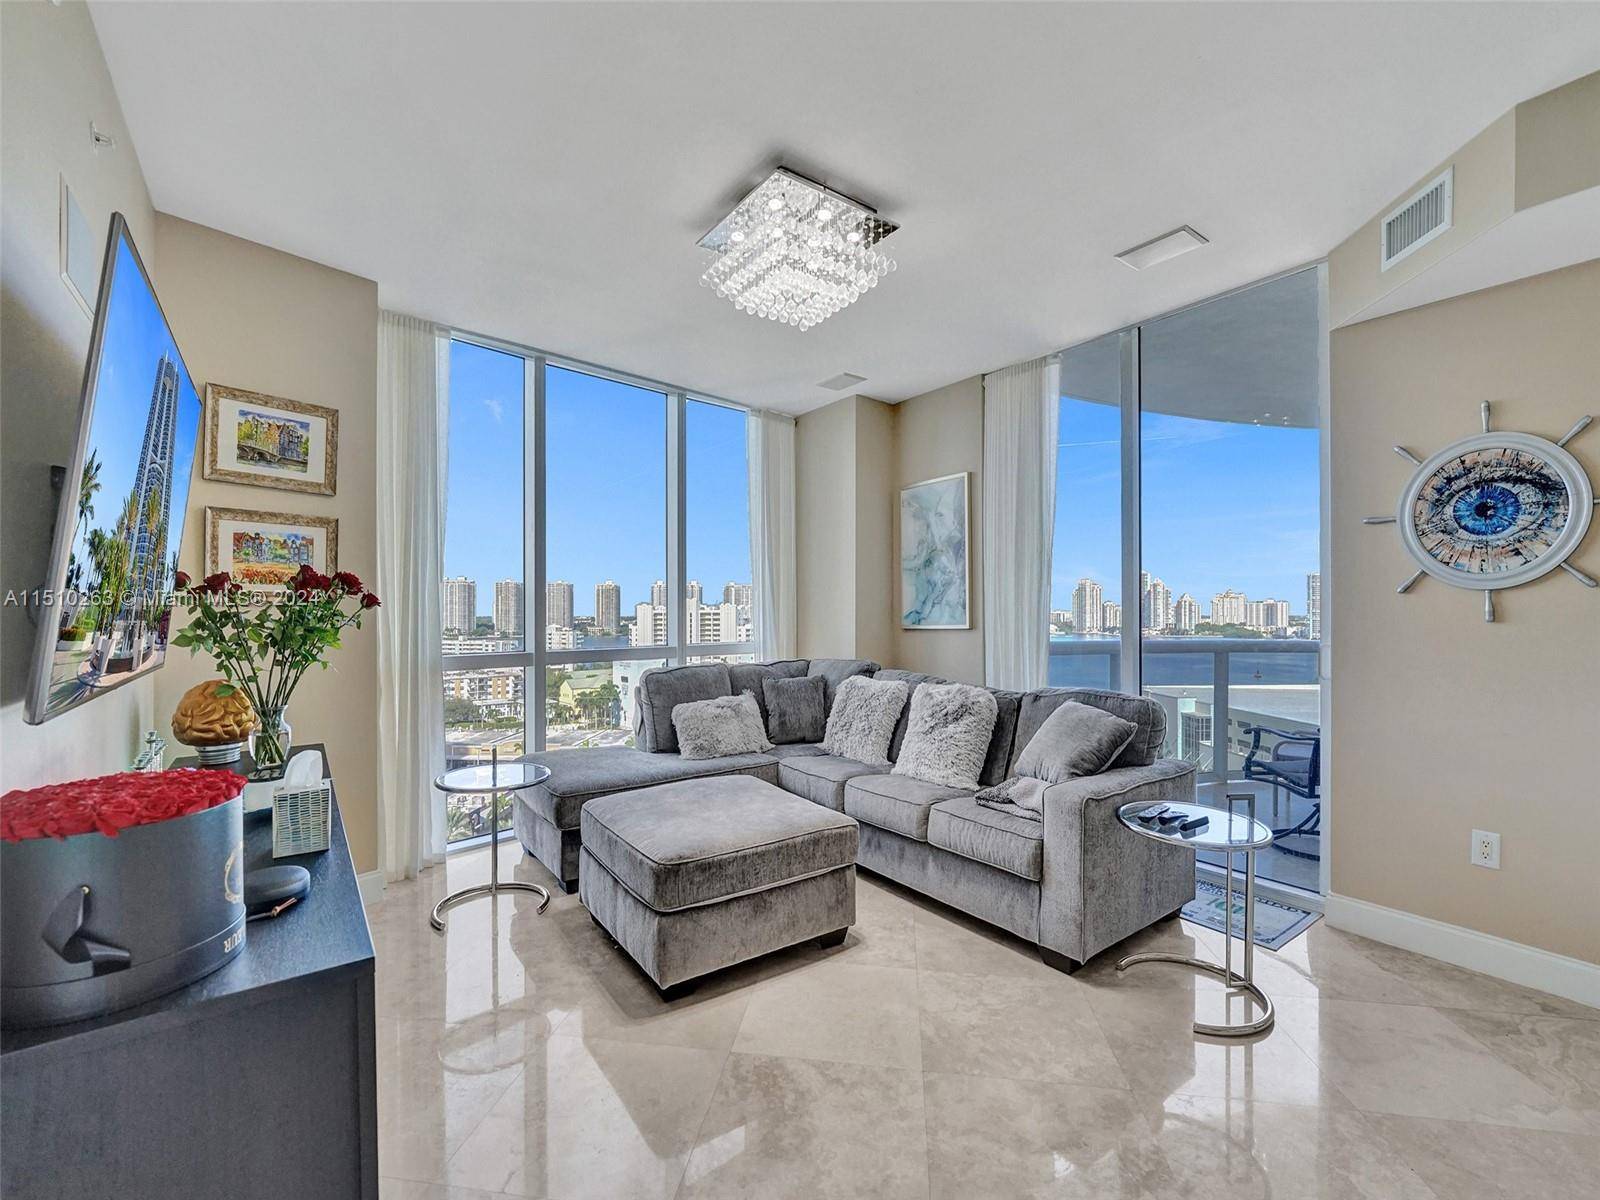 Upon entering this 2 bedroom, 2 bath unit in Trump Royale you are greeted by floor to ceiling windows that frame panoramic views of the city and Intracoastal Waterway.